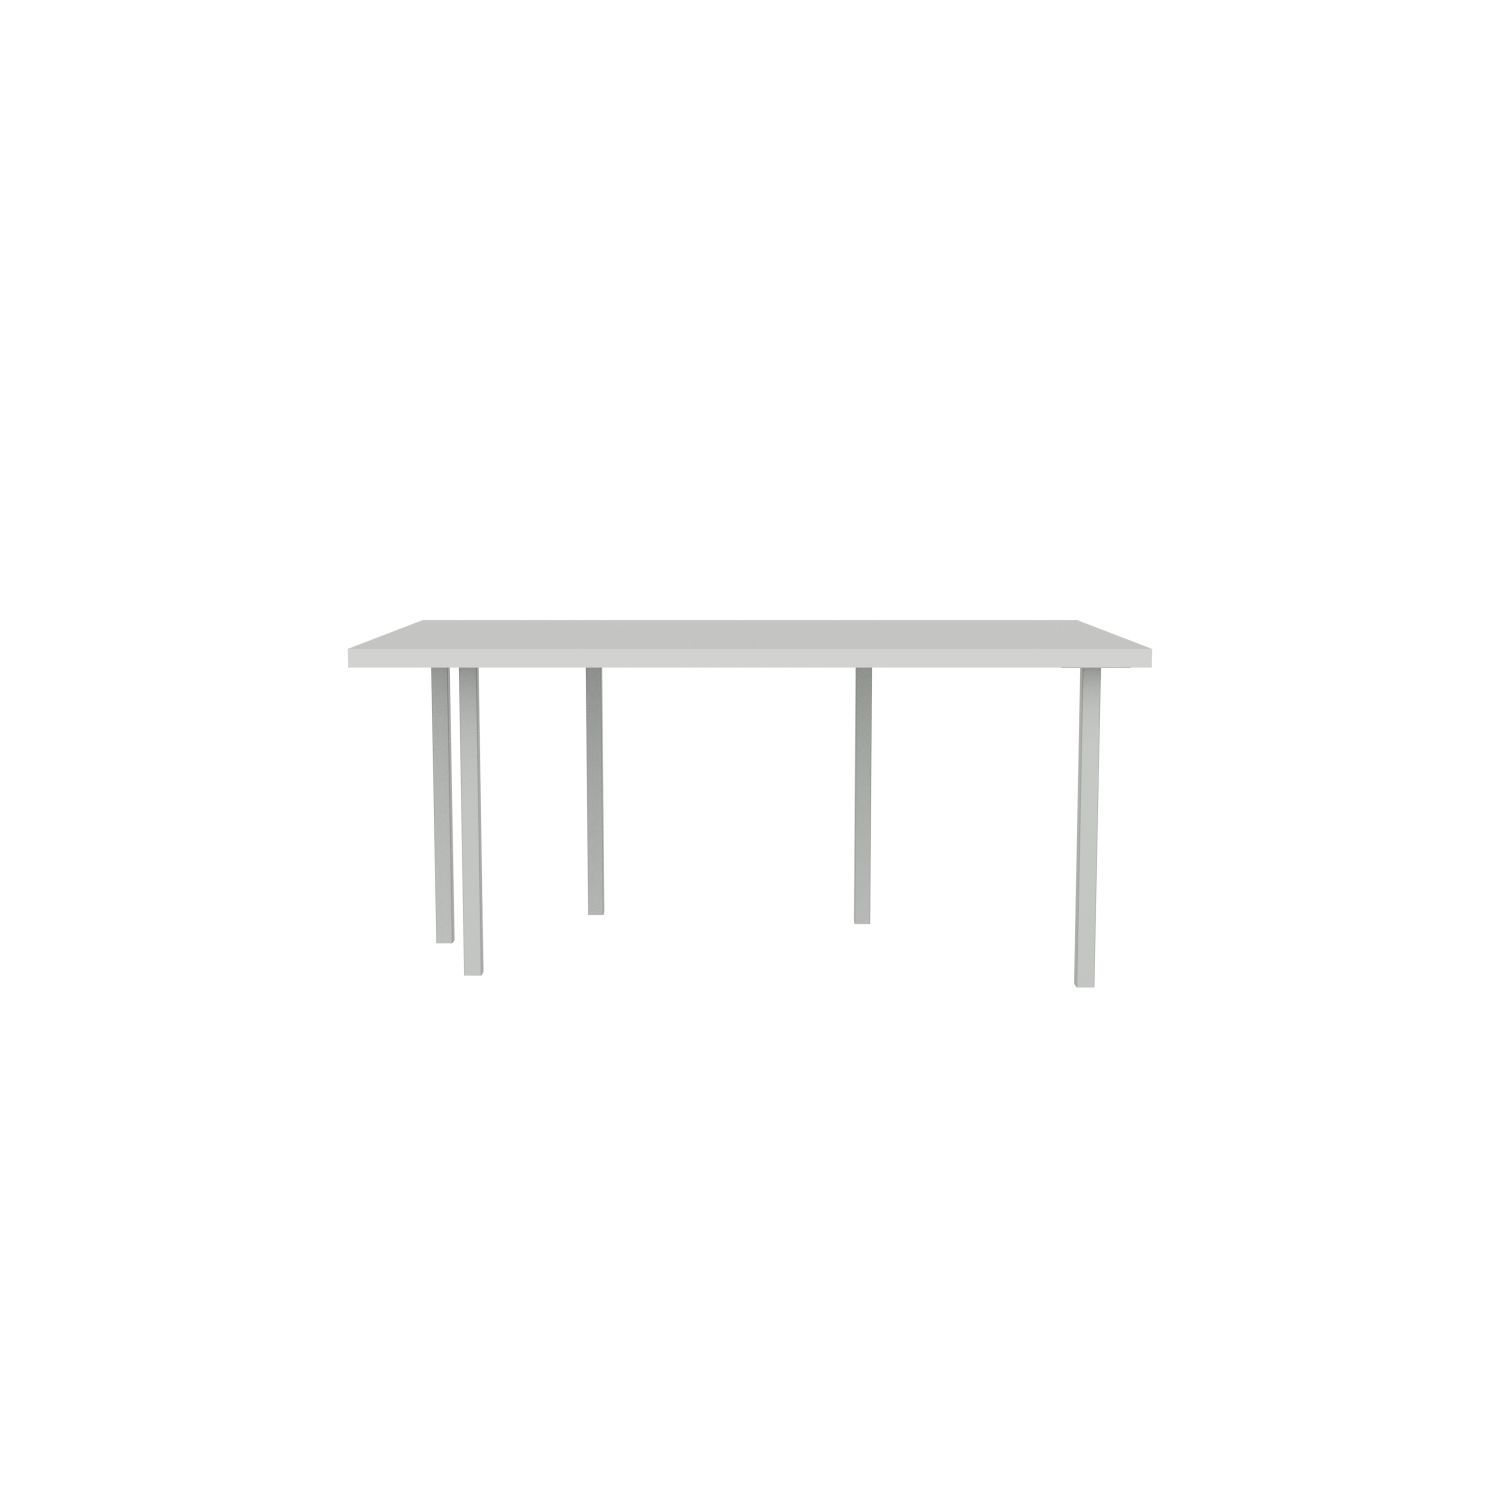 lensvelt bbrand table five fixed heigt 103x172 hpl boring grey 50 mm price level 1 light grey ral7035